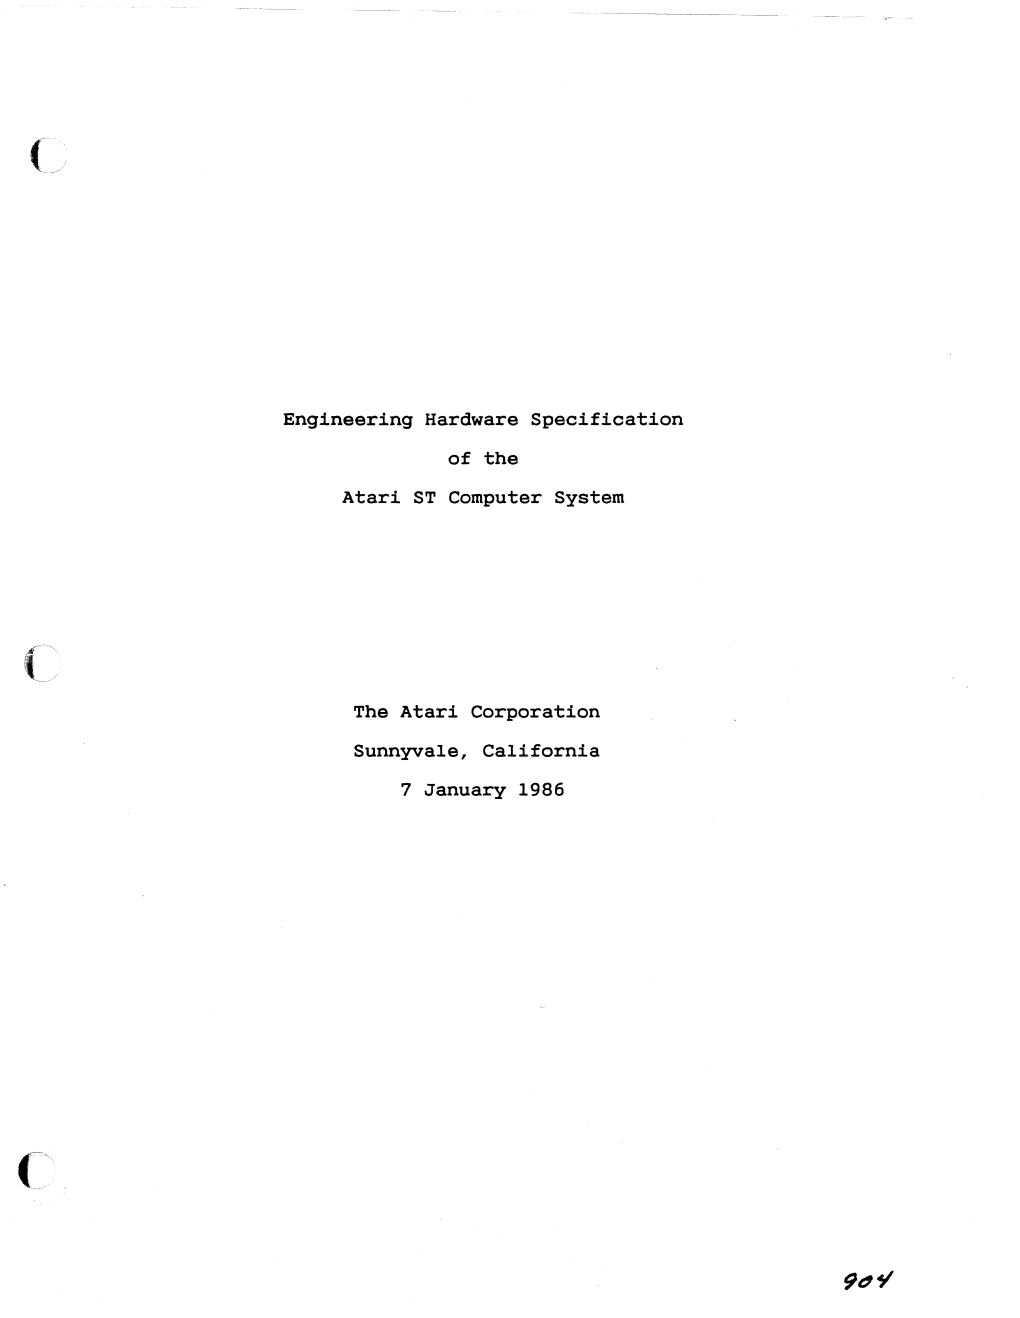 Engineering Hardware Specification of the Atari ST Computer System